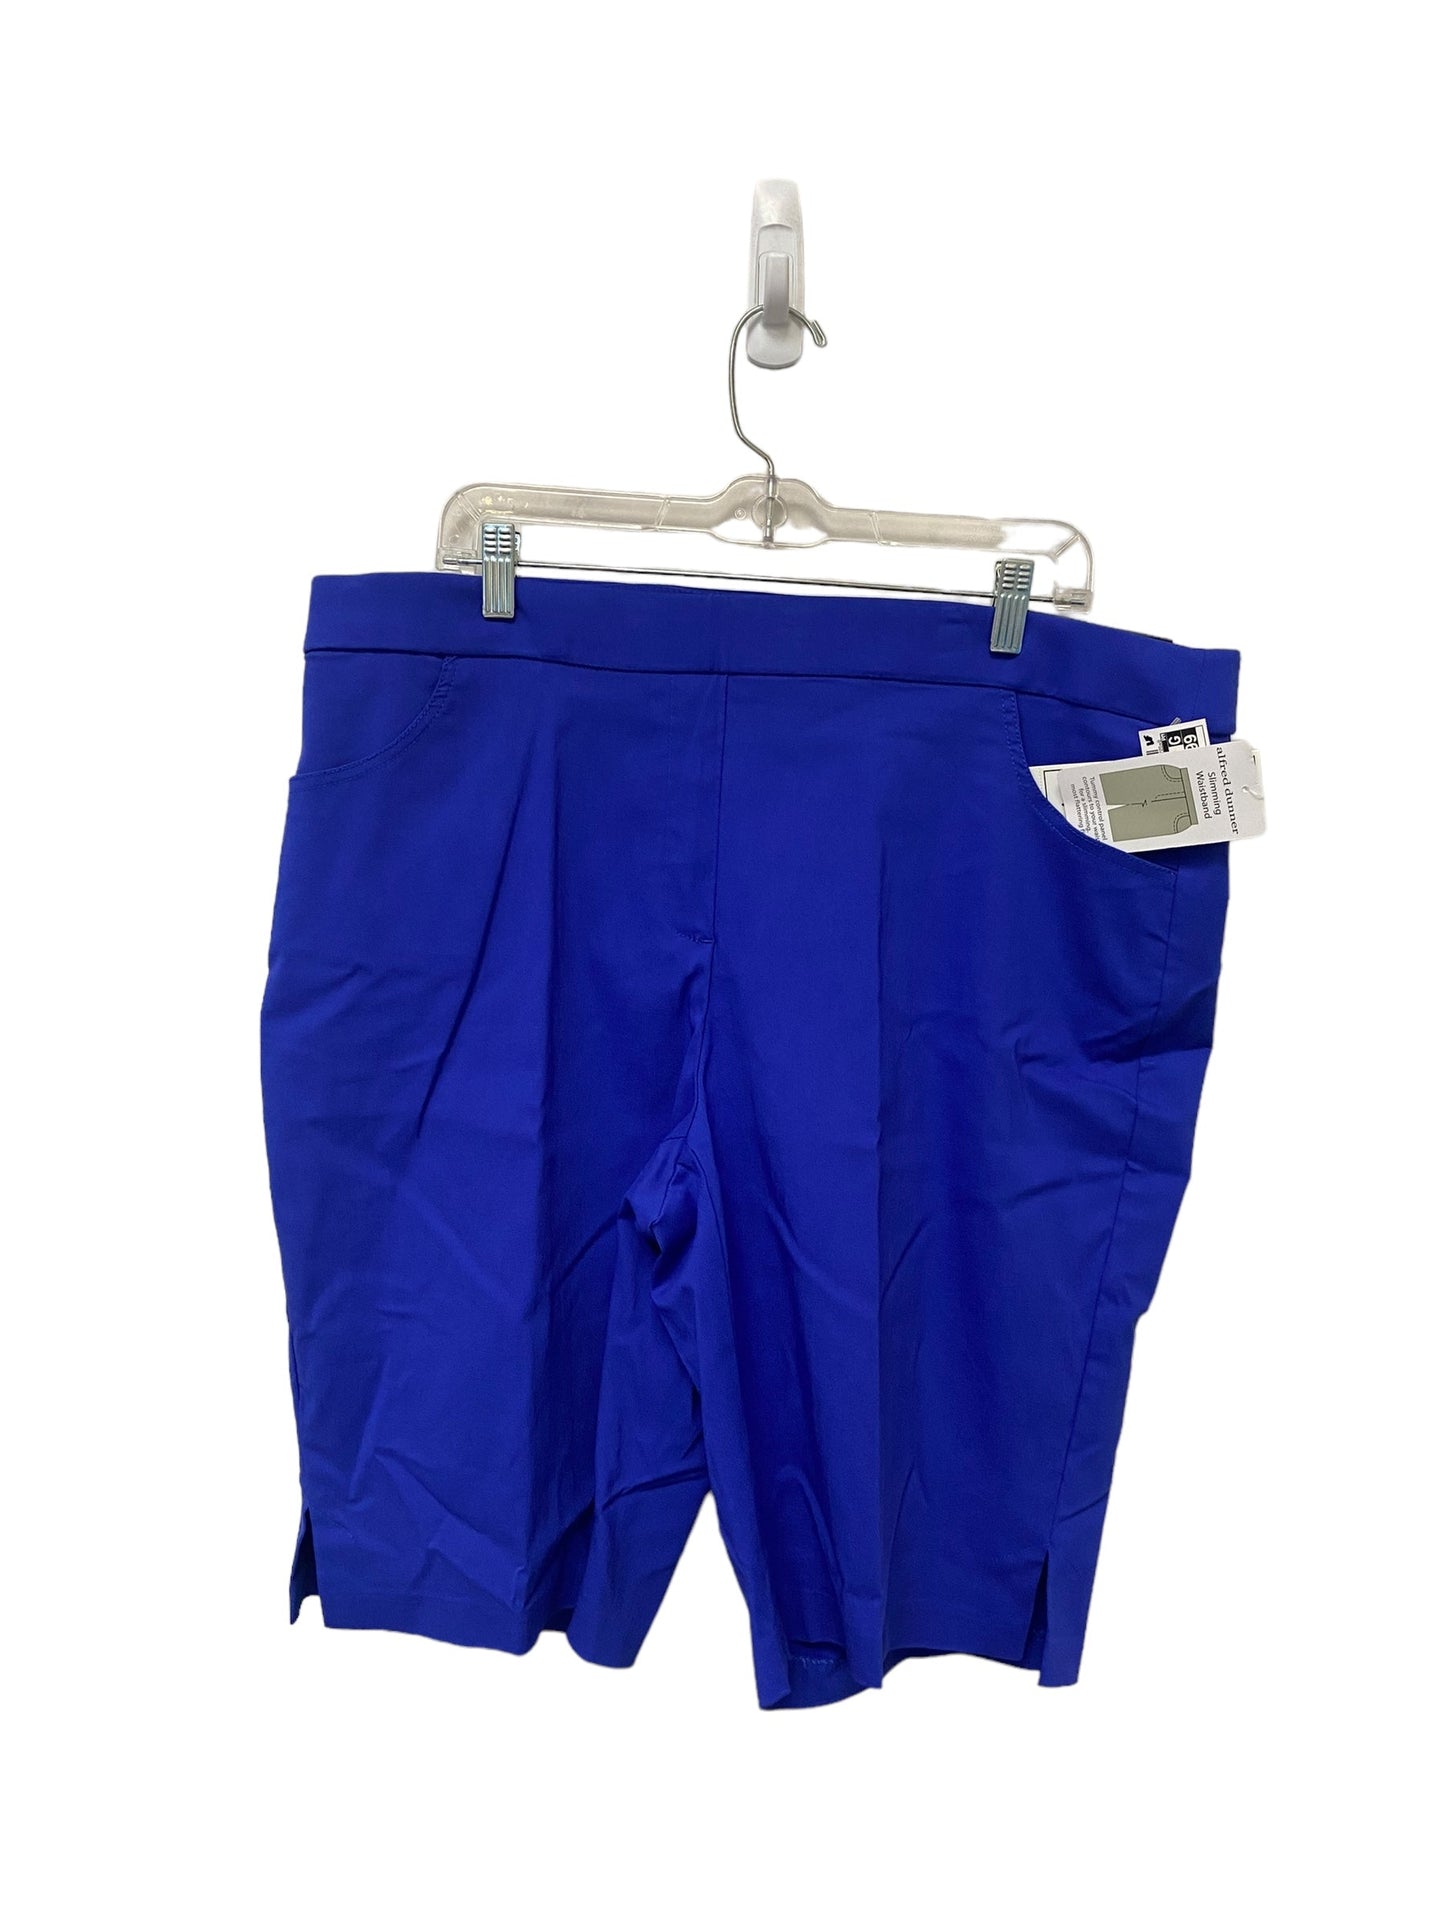 Blue Shorts Alfred Dunner, Size 16